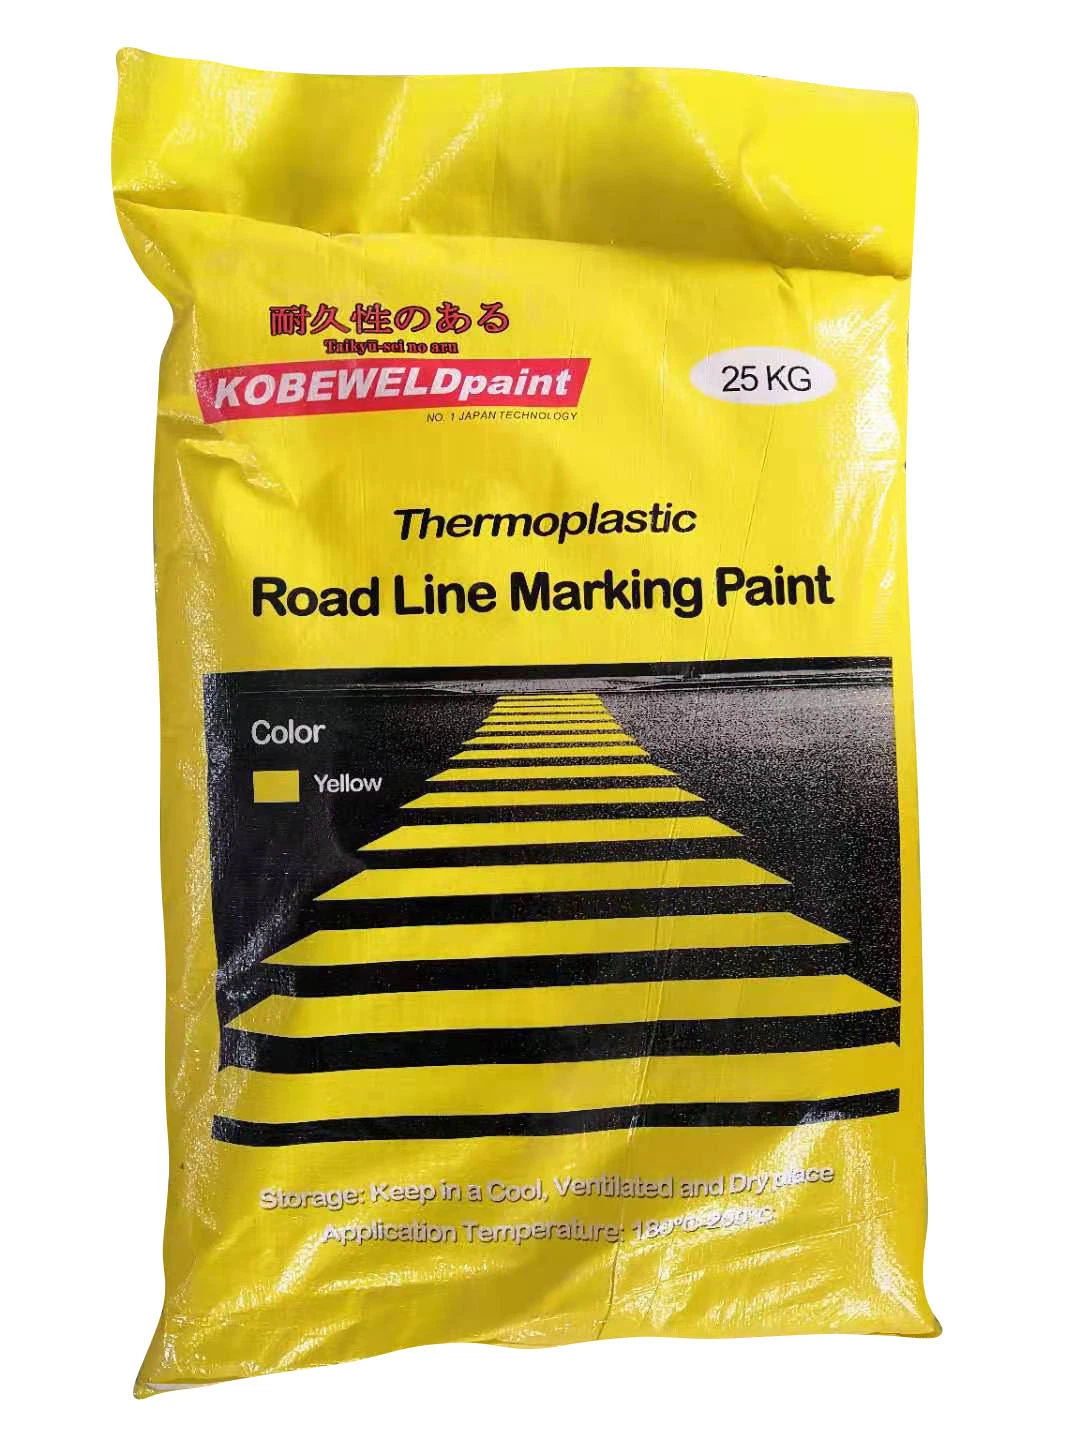 Reflective Thermoplastic Road Marking Paint with Glass Beads